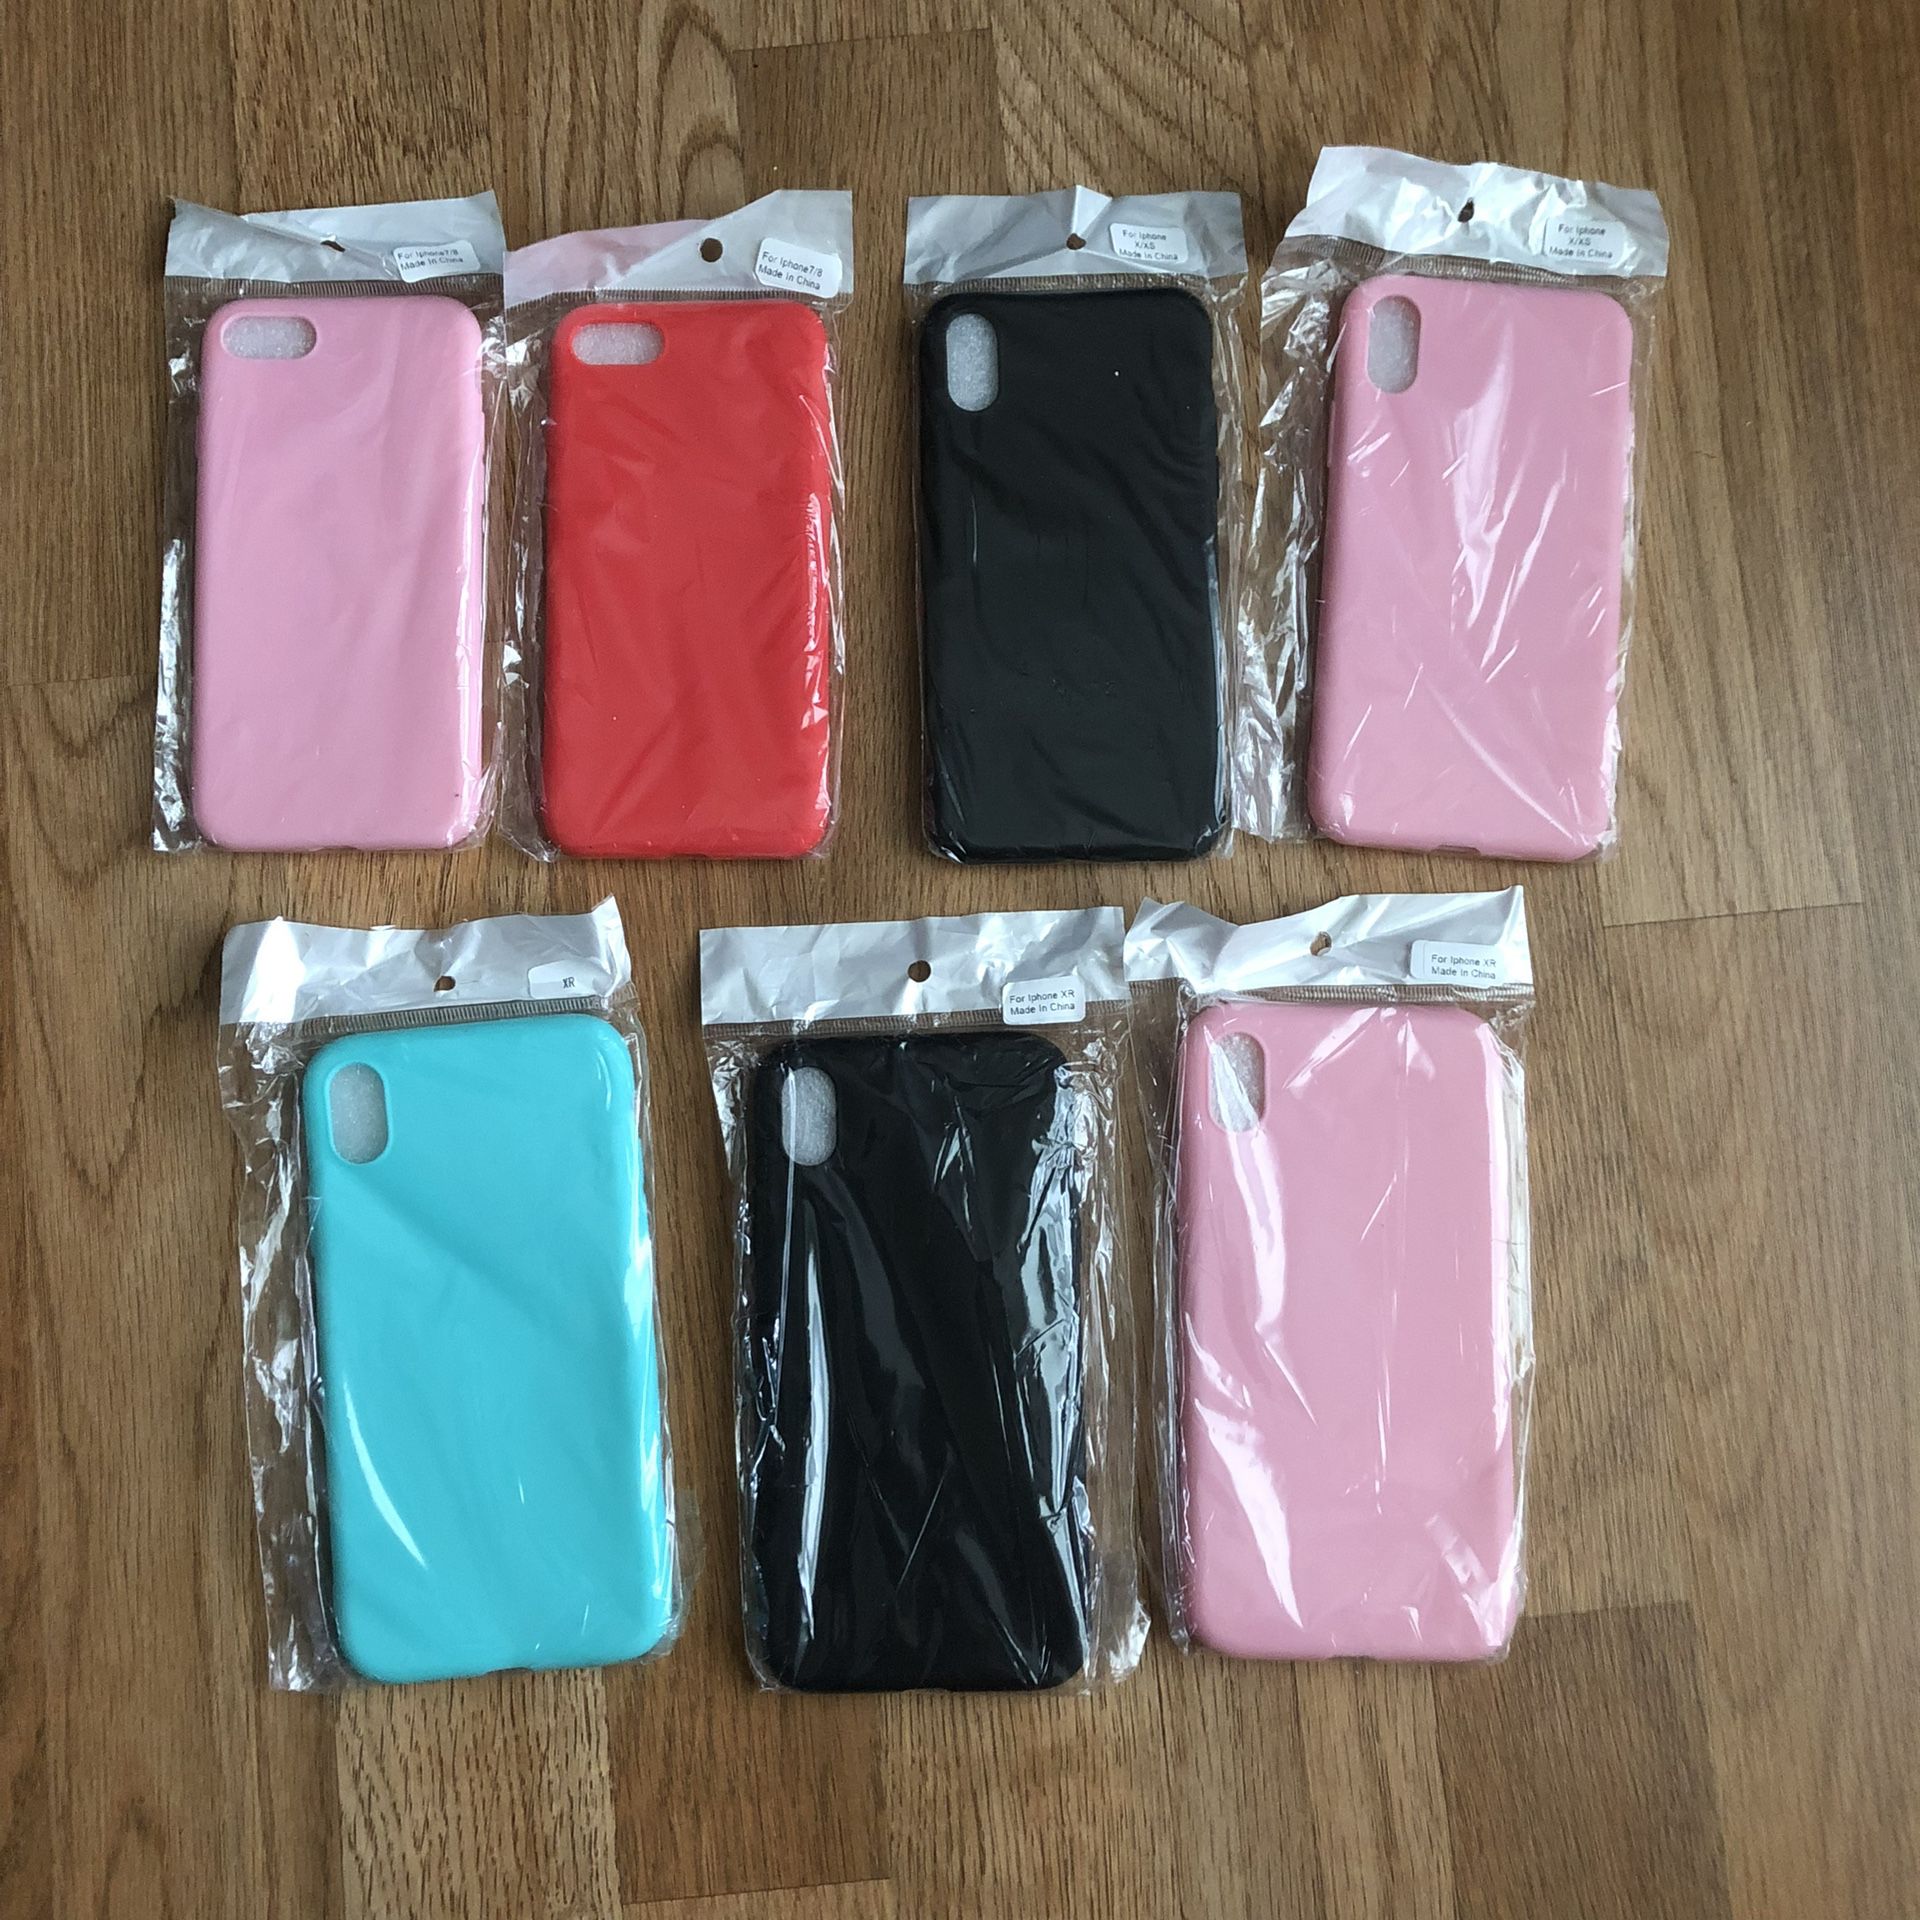 Brand new silicone case cover for iPhones XR, X/XS and 7/8